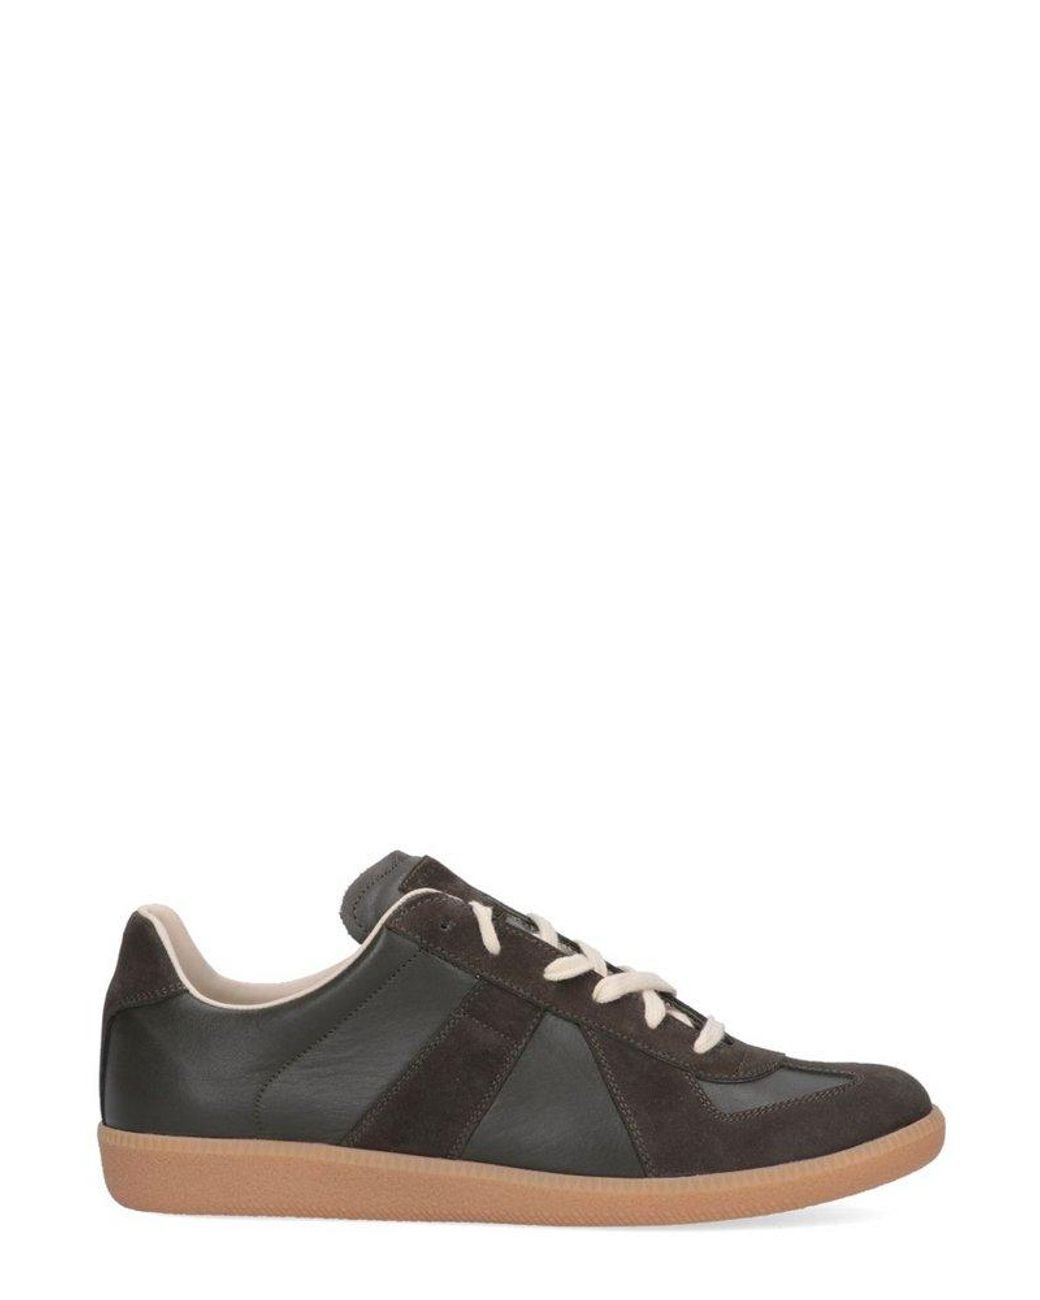 Maison Margiela Replica Lace-up Sneakers in Black for Men | Lyst